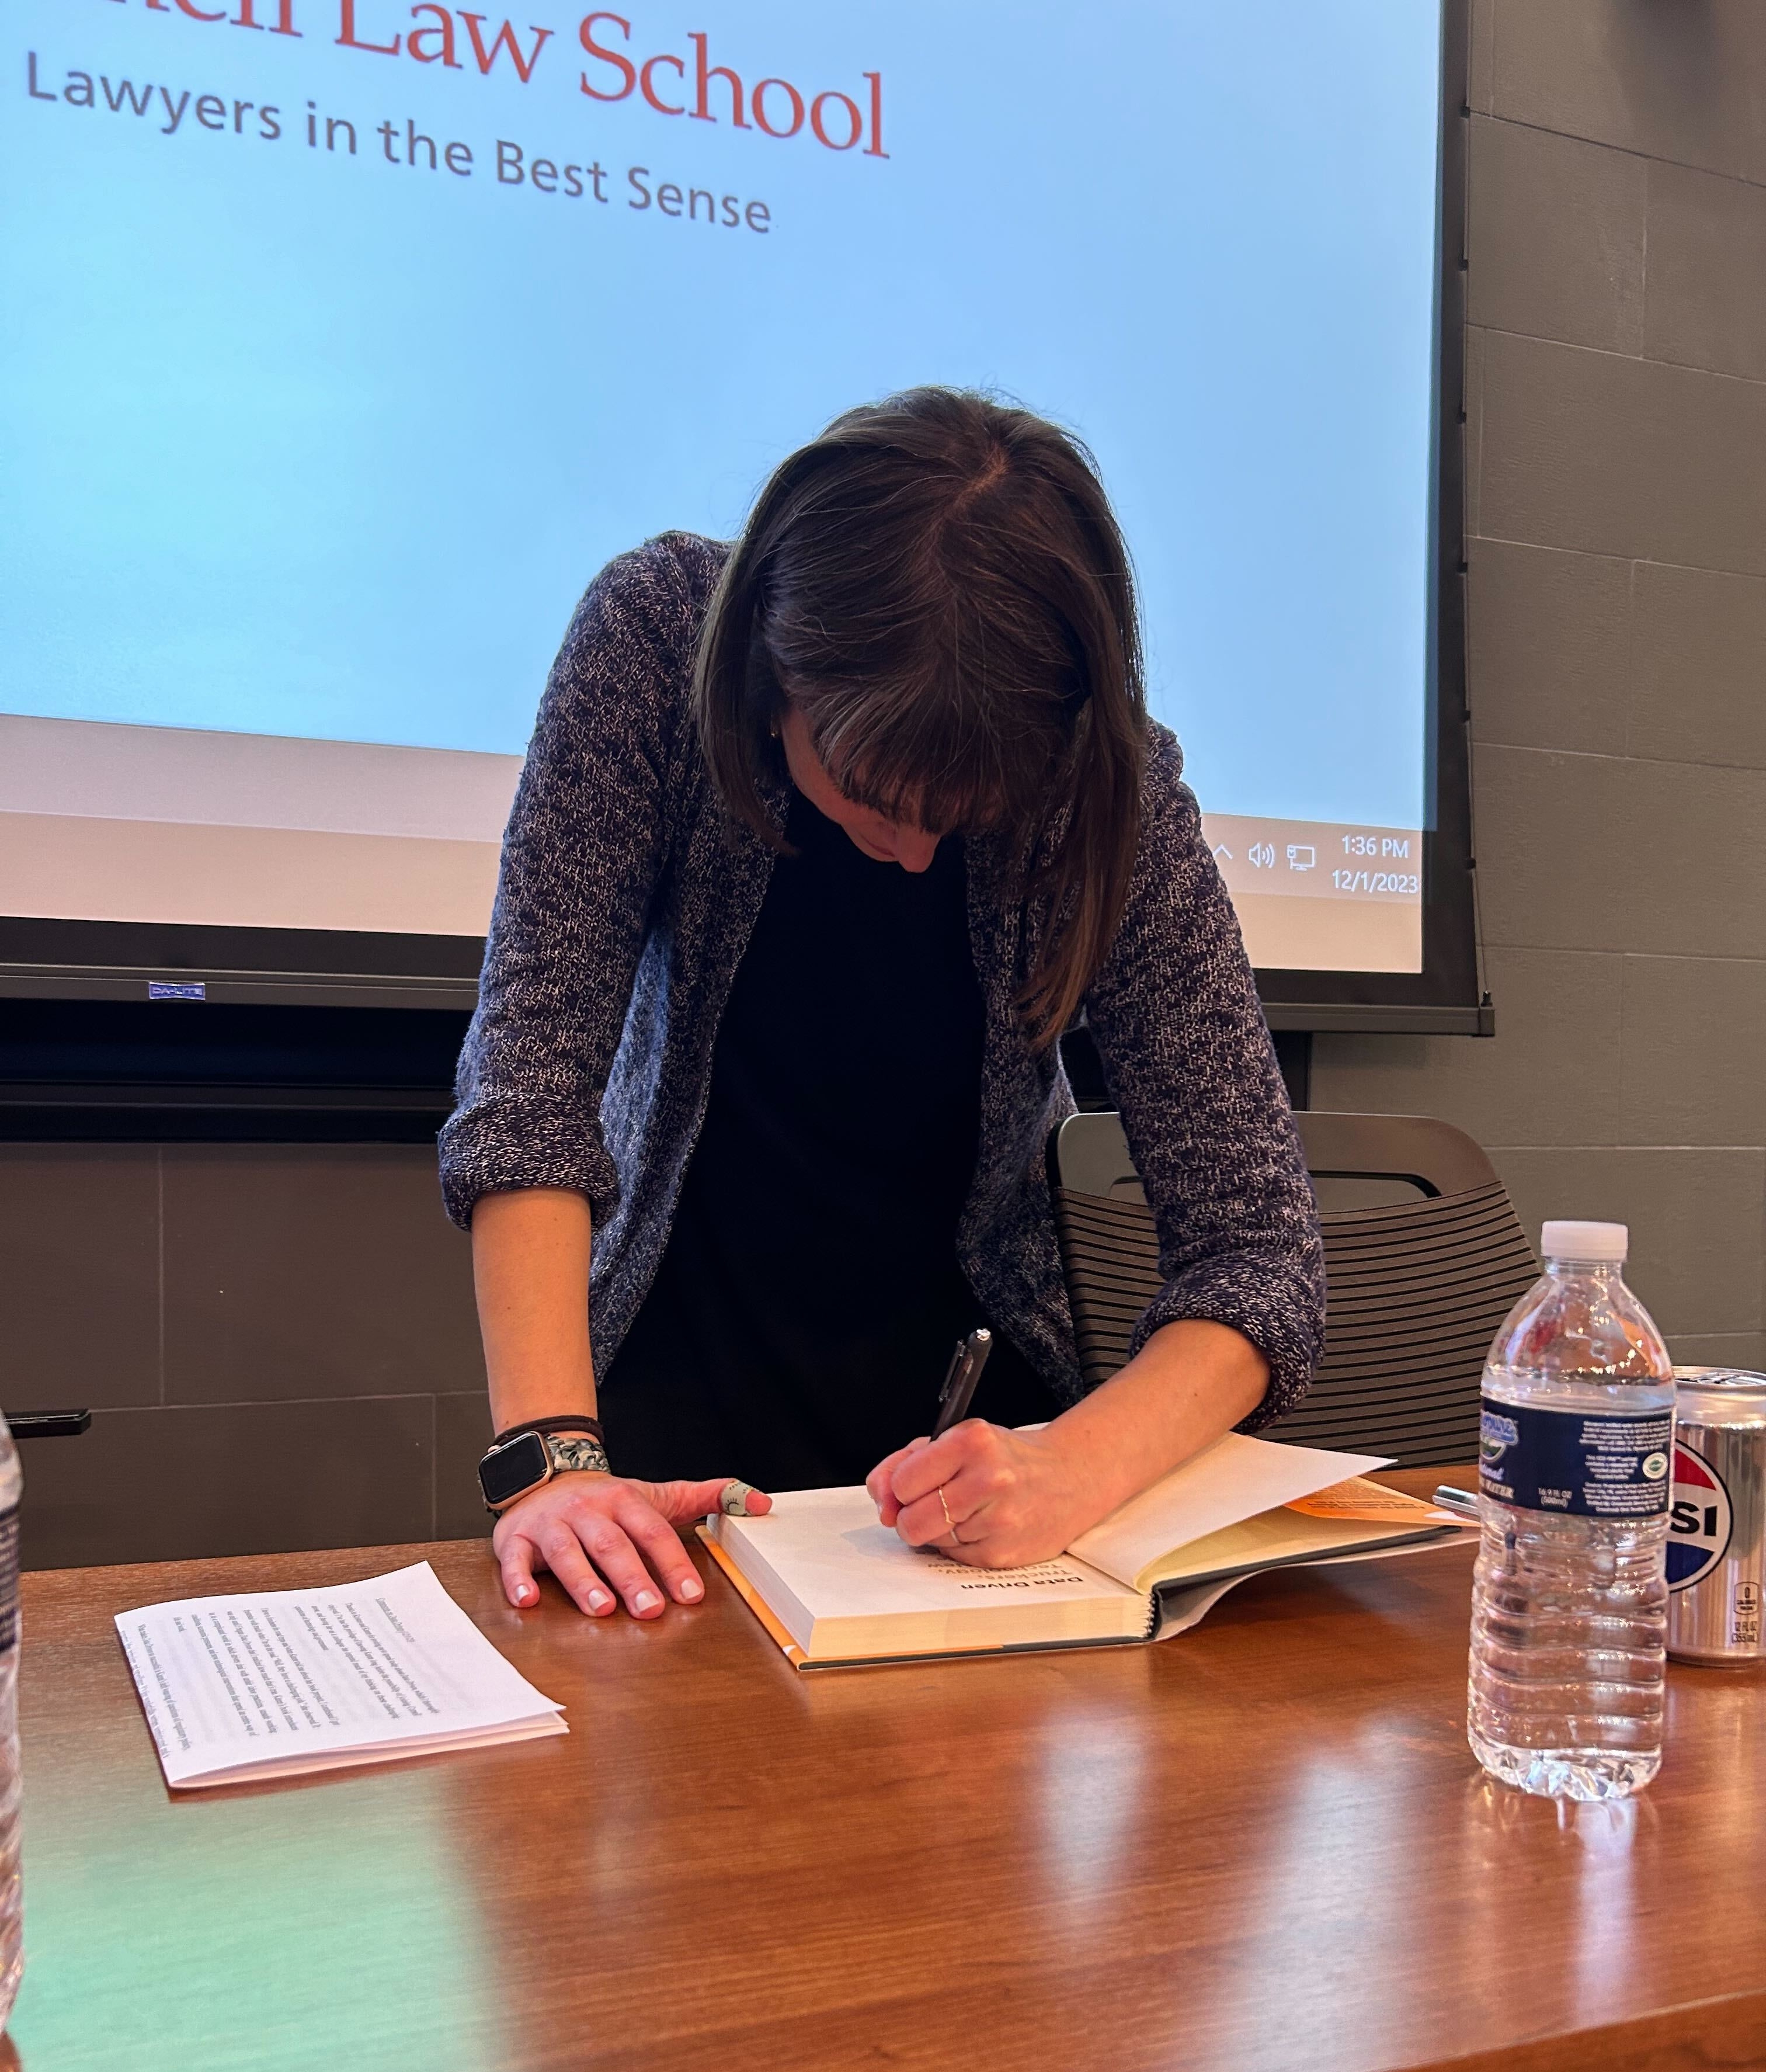 Professor Karen Levy signing a copy of her book for someone